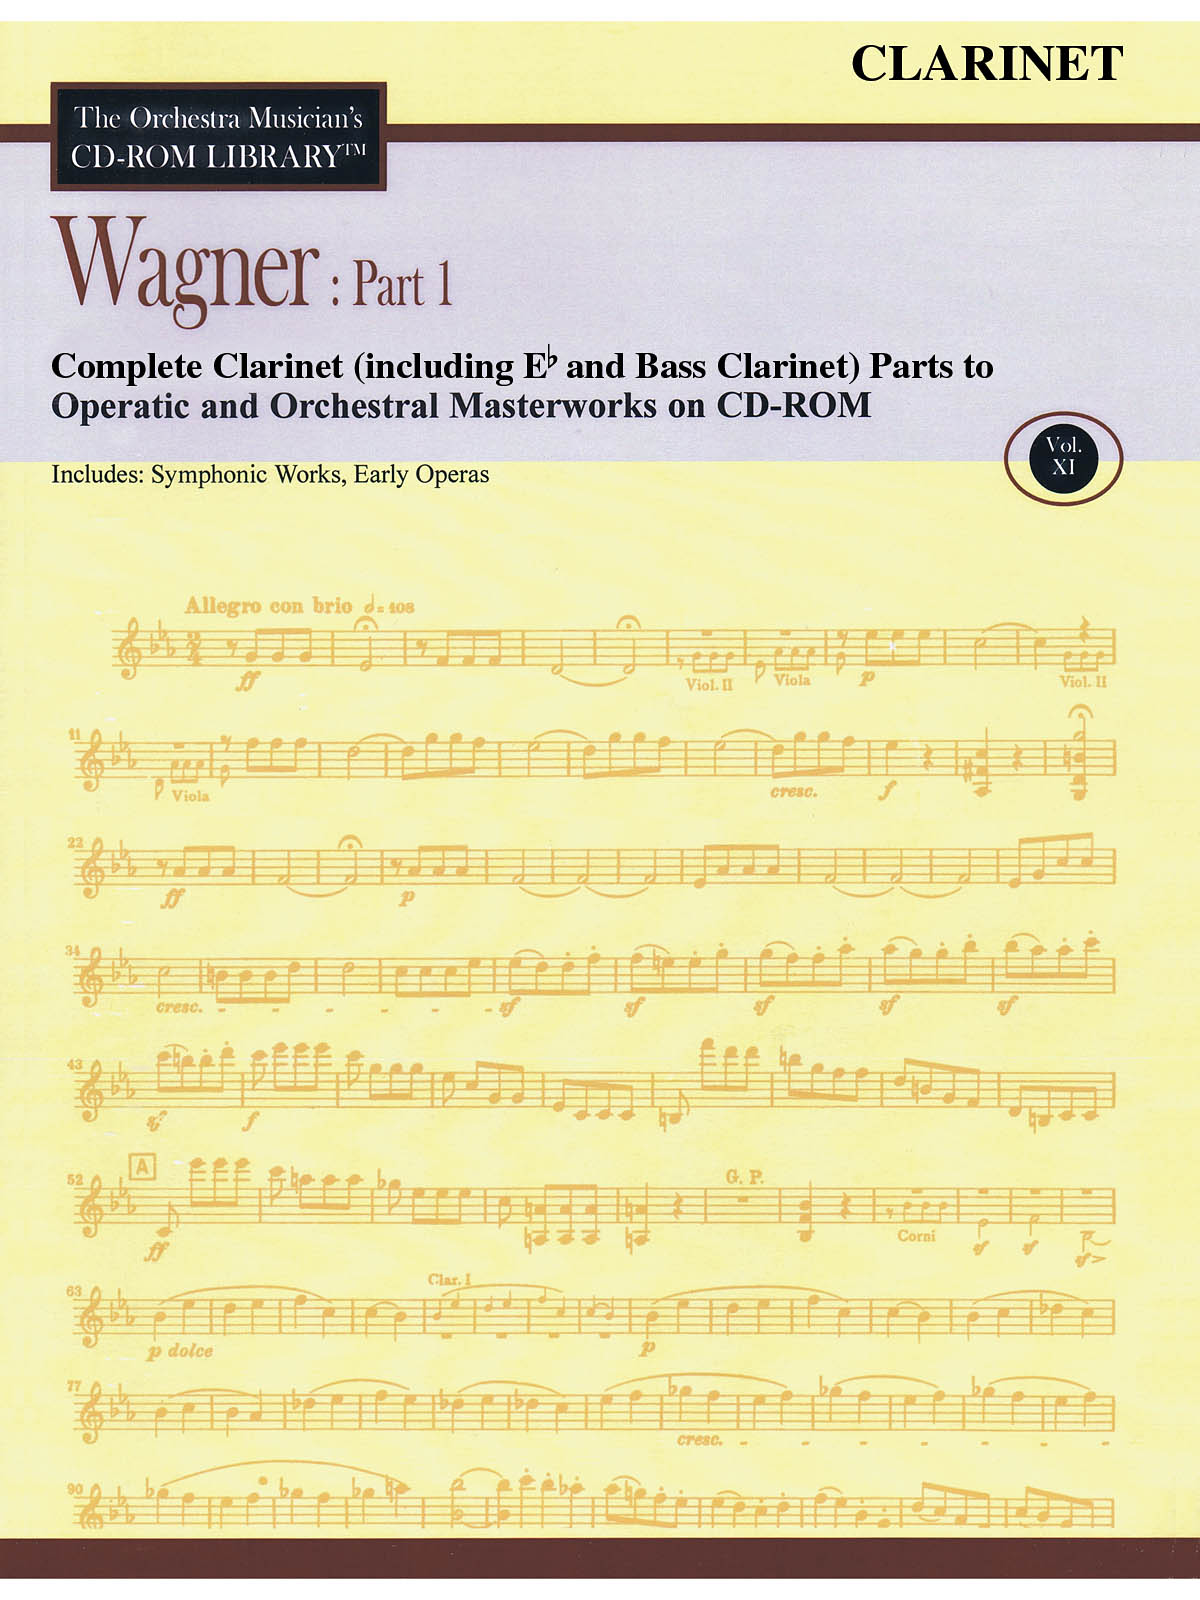 Wagner: Part 1 - Volume 11(The Orchestra Musician's CD-ROM Library - Clarinet)